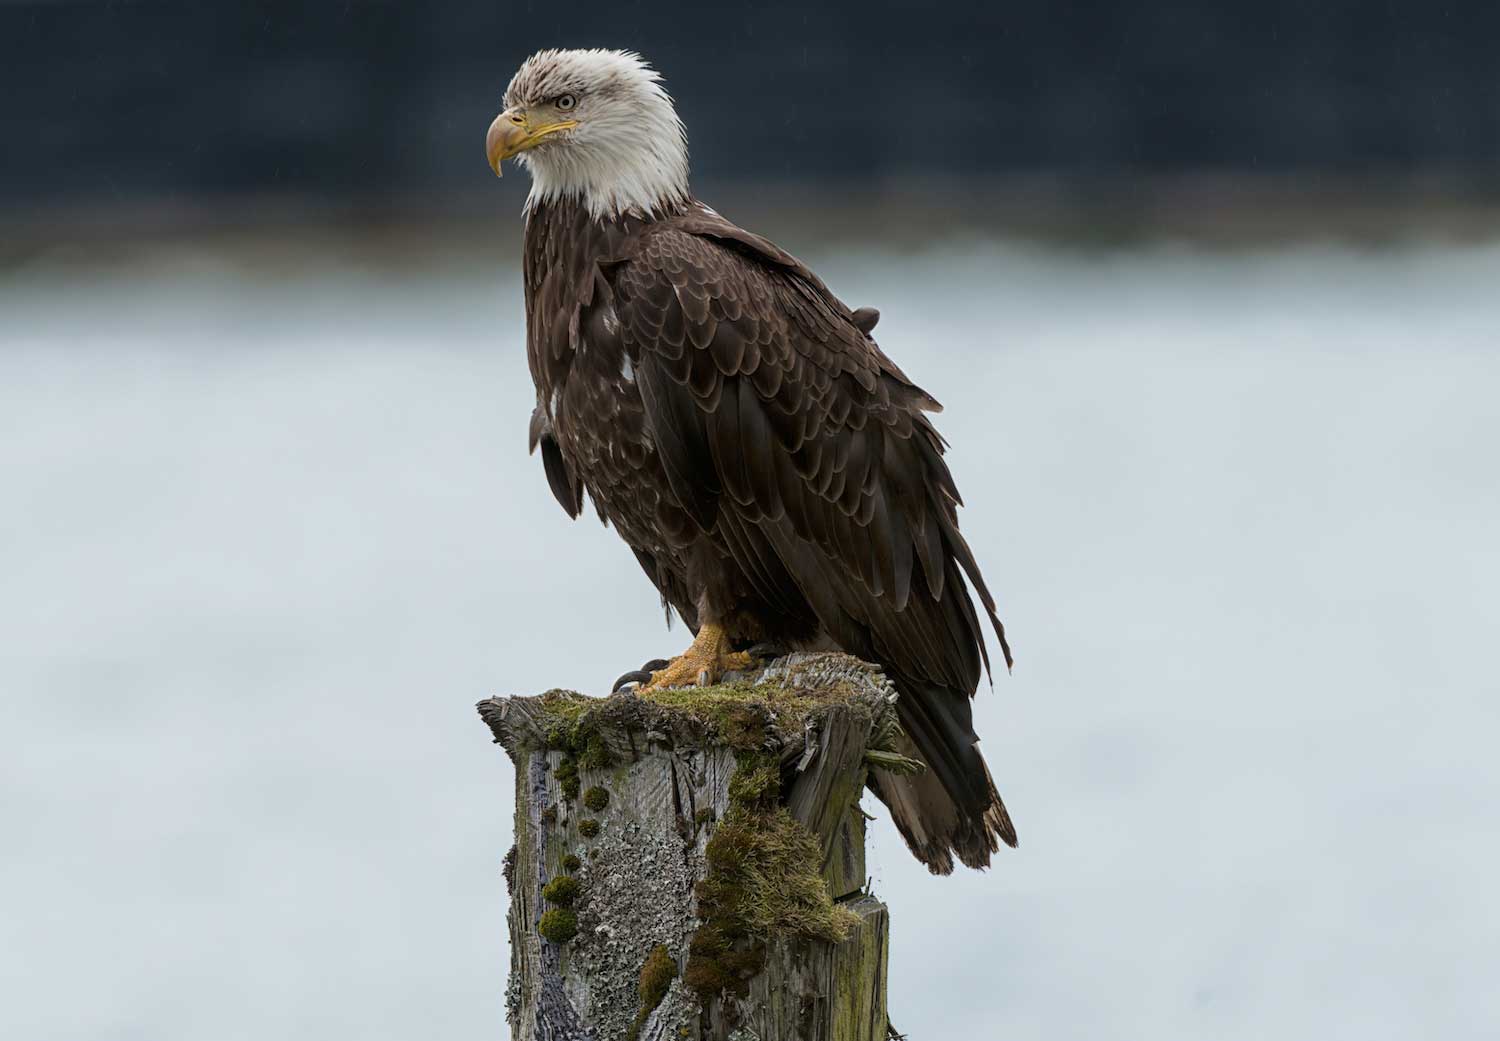 Five things you probably don't know about bald eagles